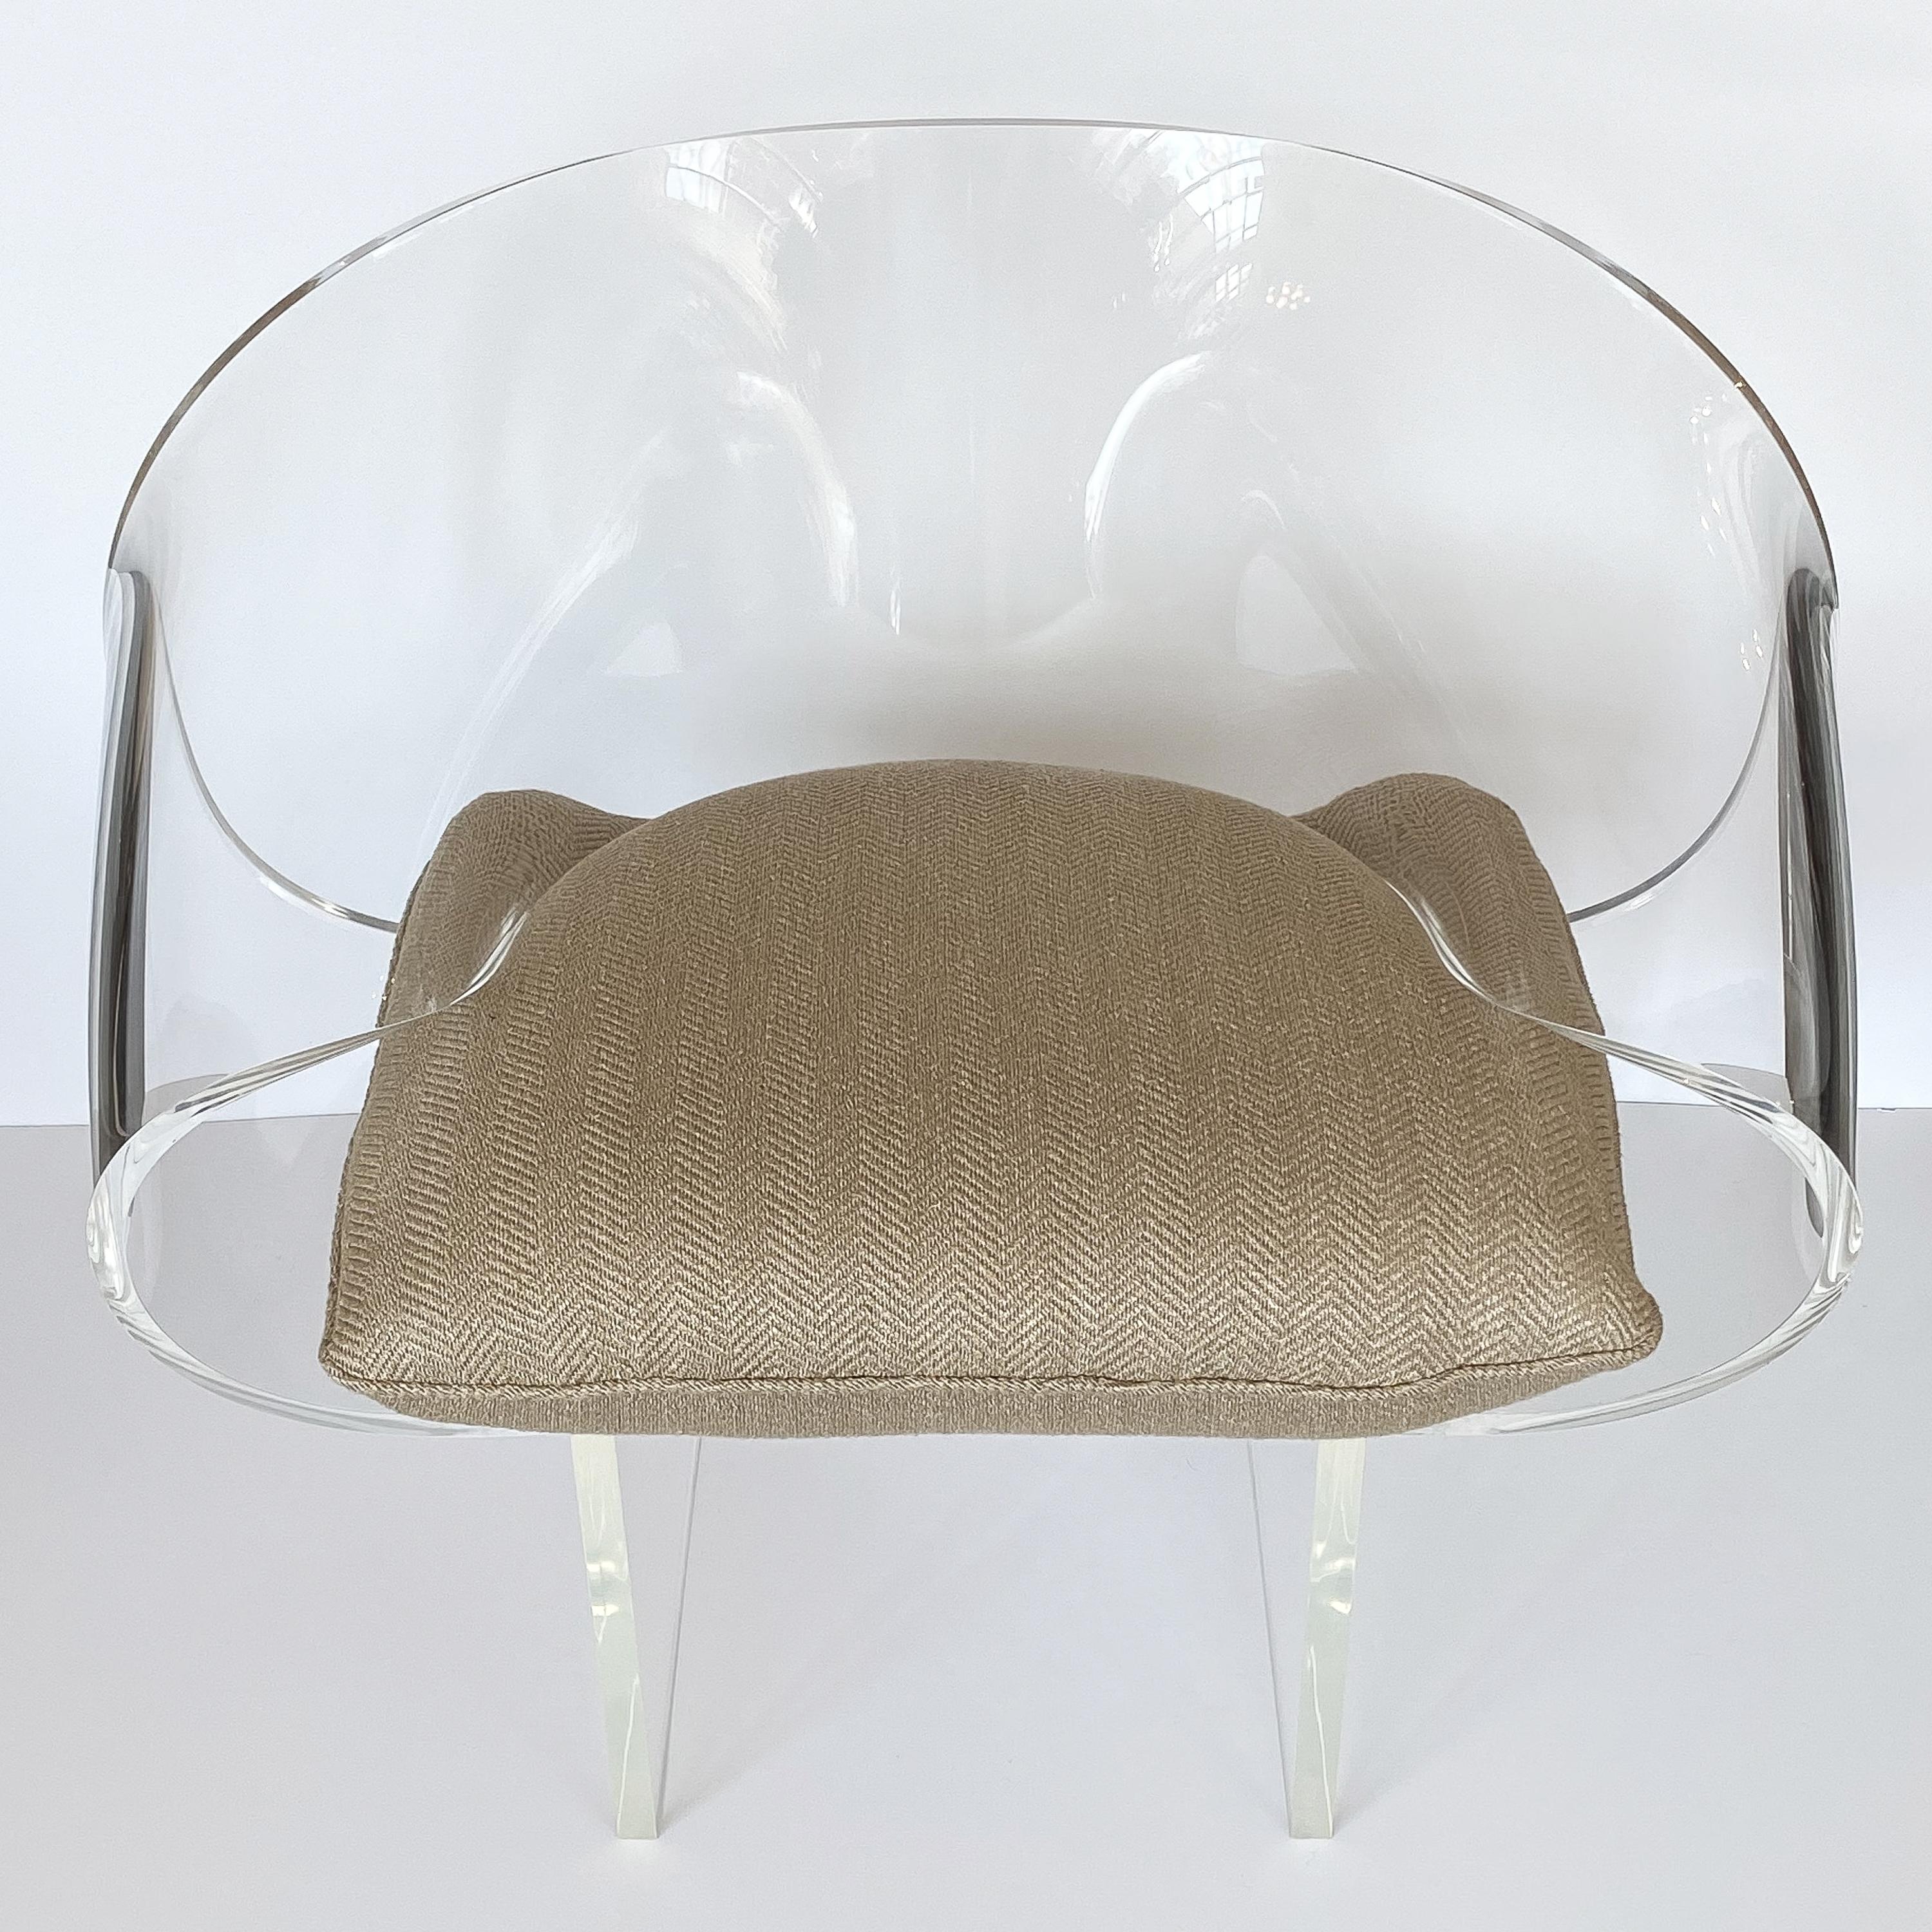 Stunning sculptural Lucite ribbon lounge chair by Robert Van Horn, circa 1970s. This signed all original example is constructed of bent / molded 0.75” thick clear Lucite. Loose seat cushion can be easily recovered or re-imagined in your own choice